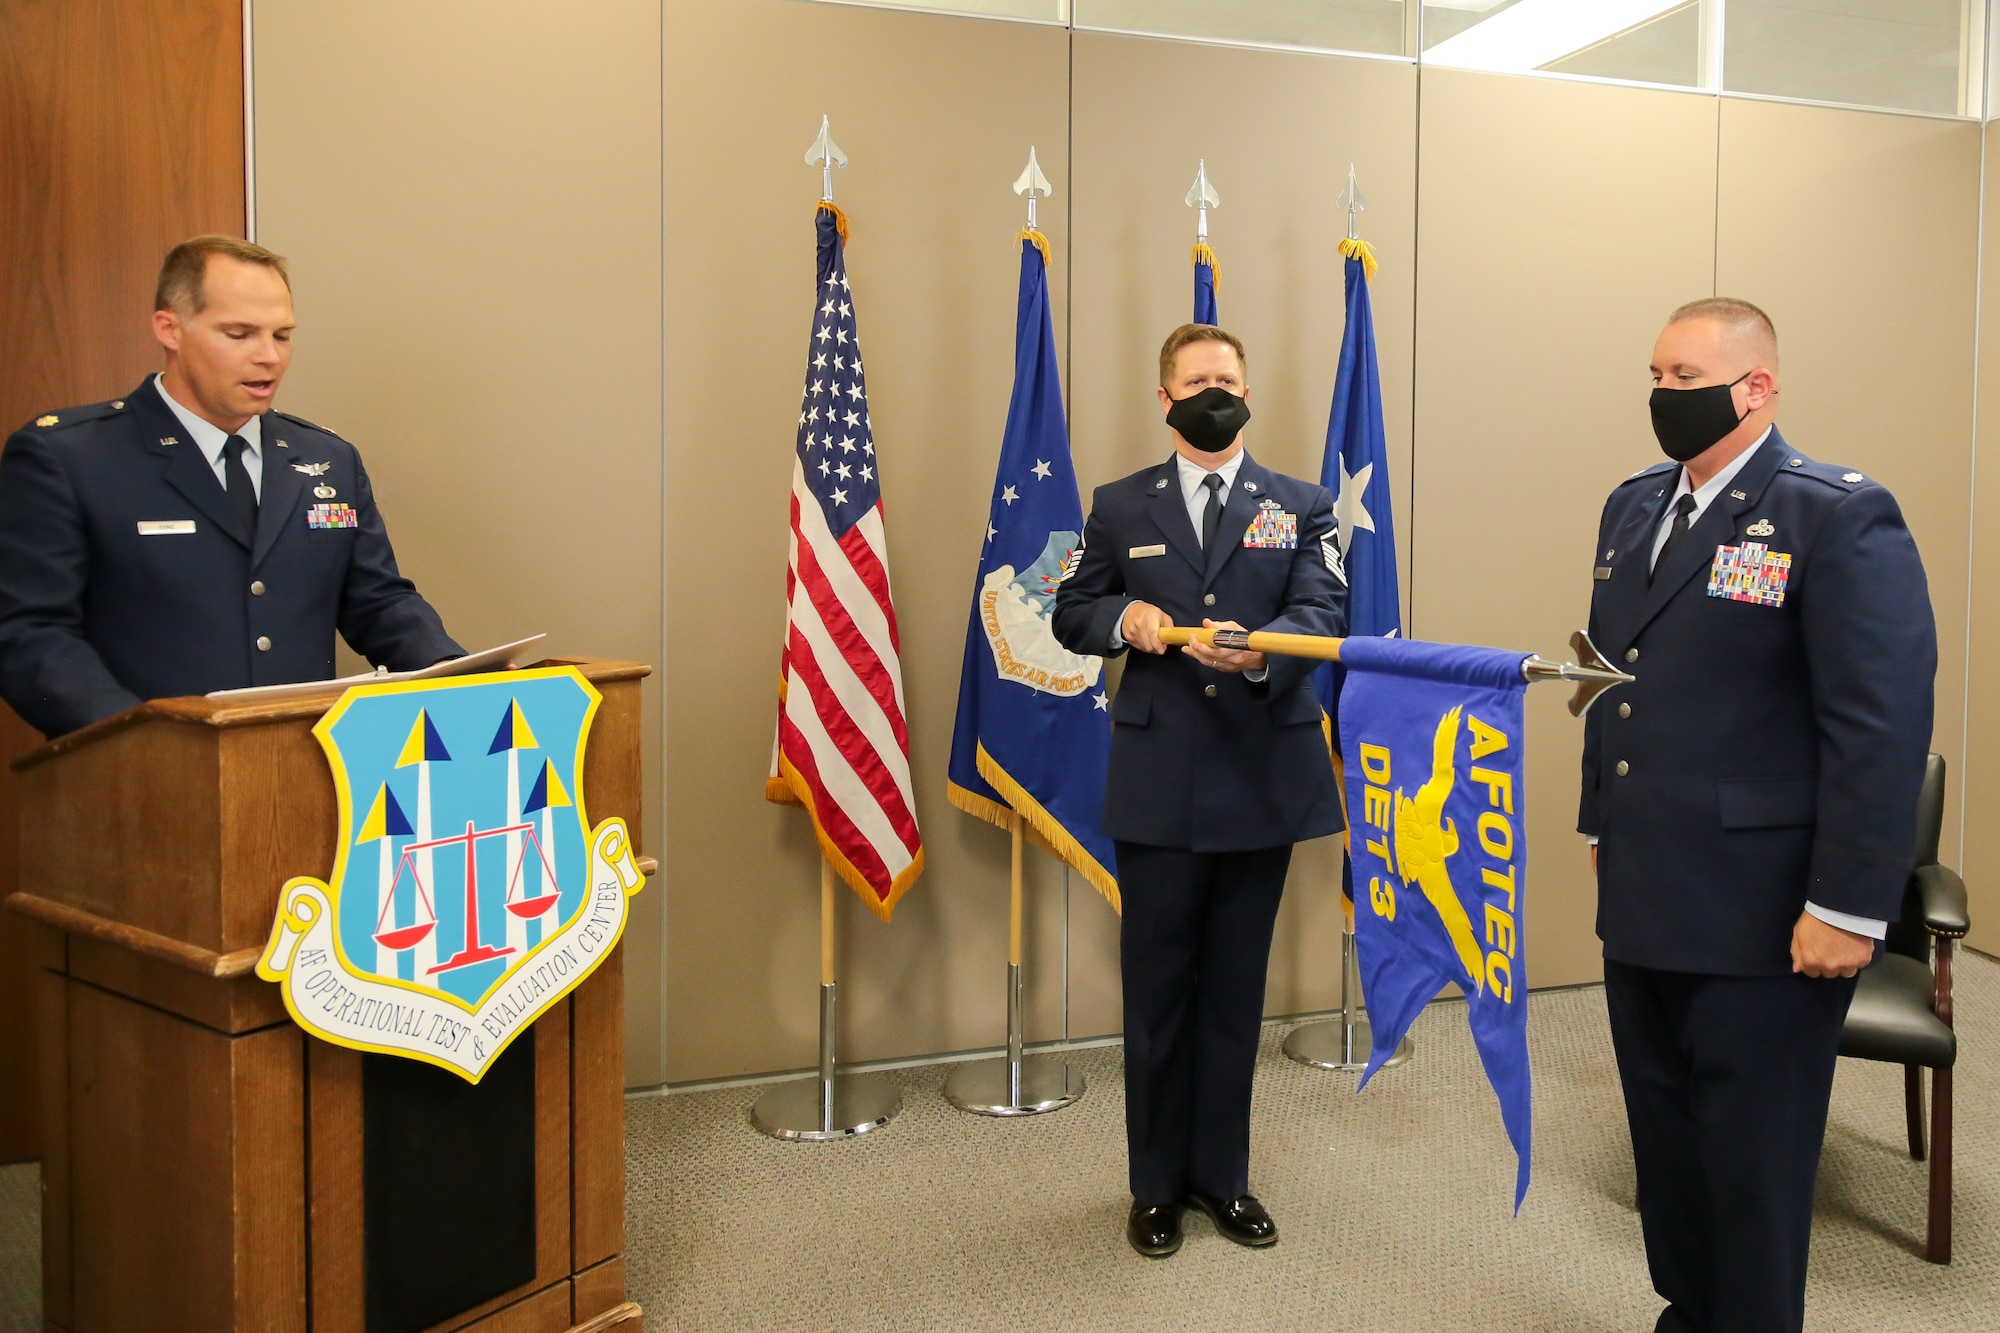 The Air Force Operational Test and Evaluation Center Detachment 3 guidon is presented.